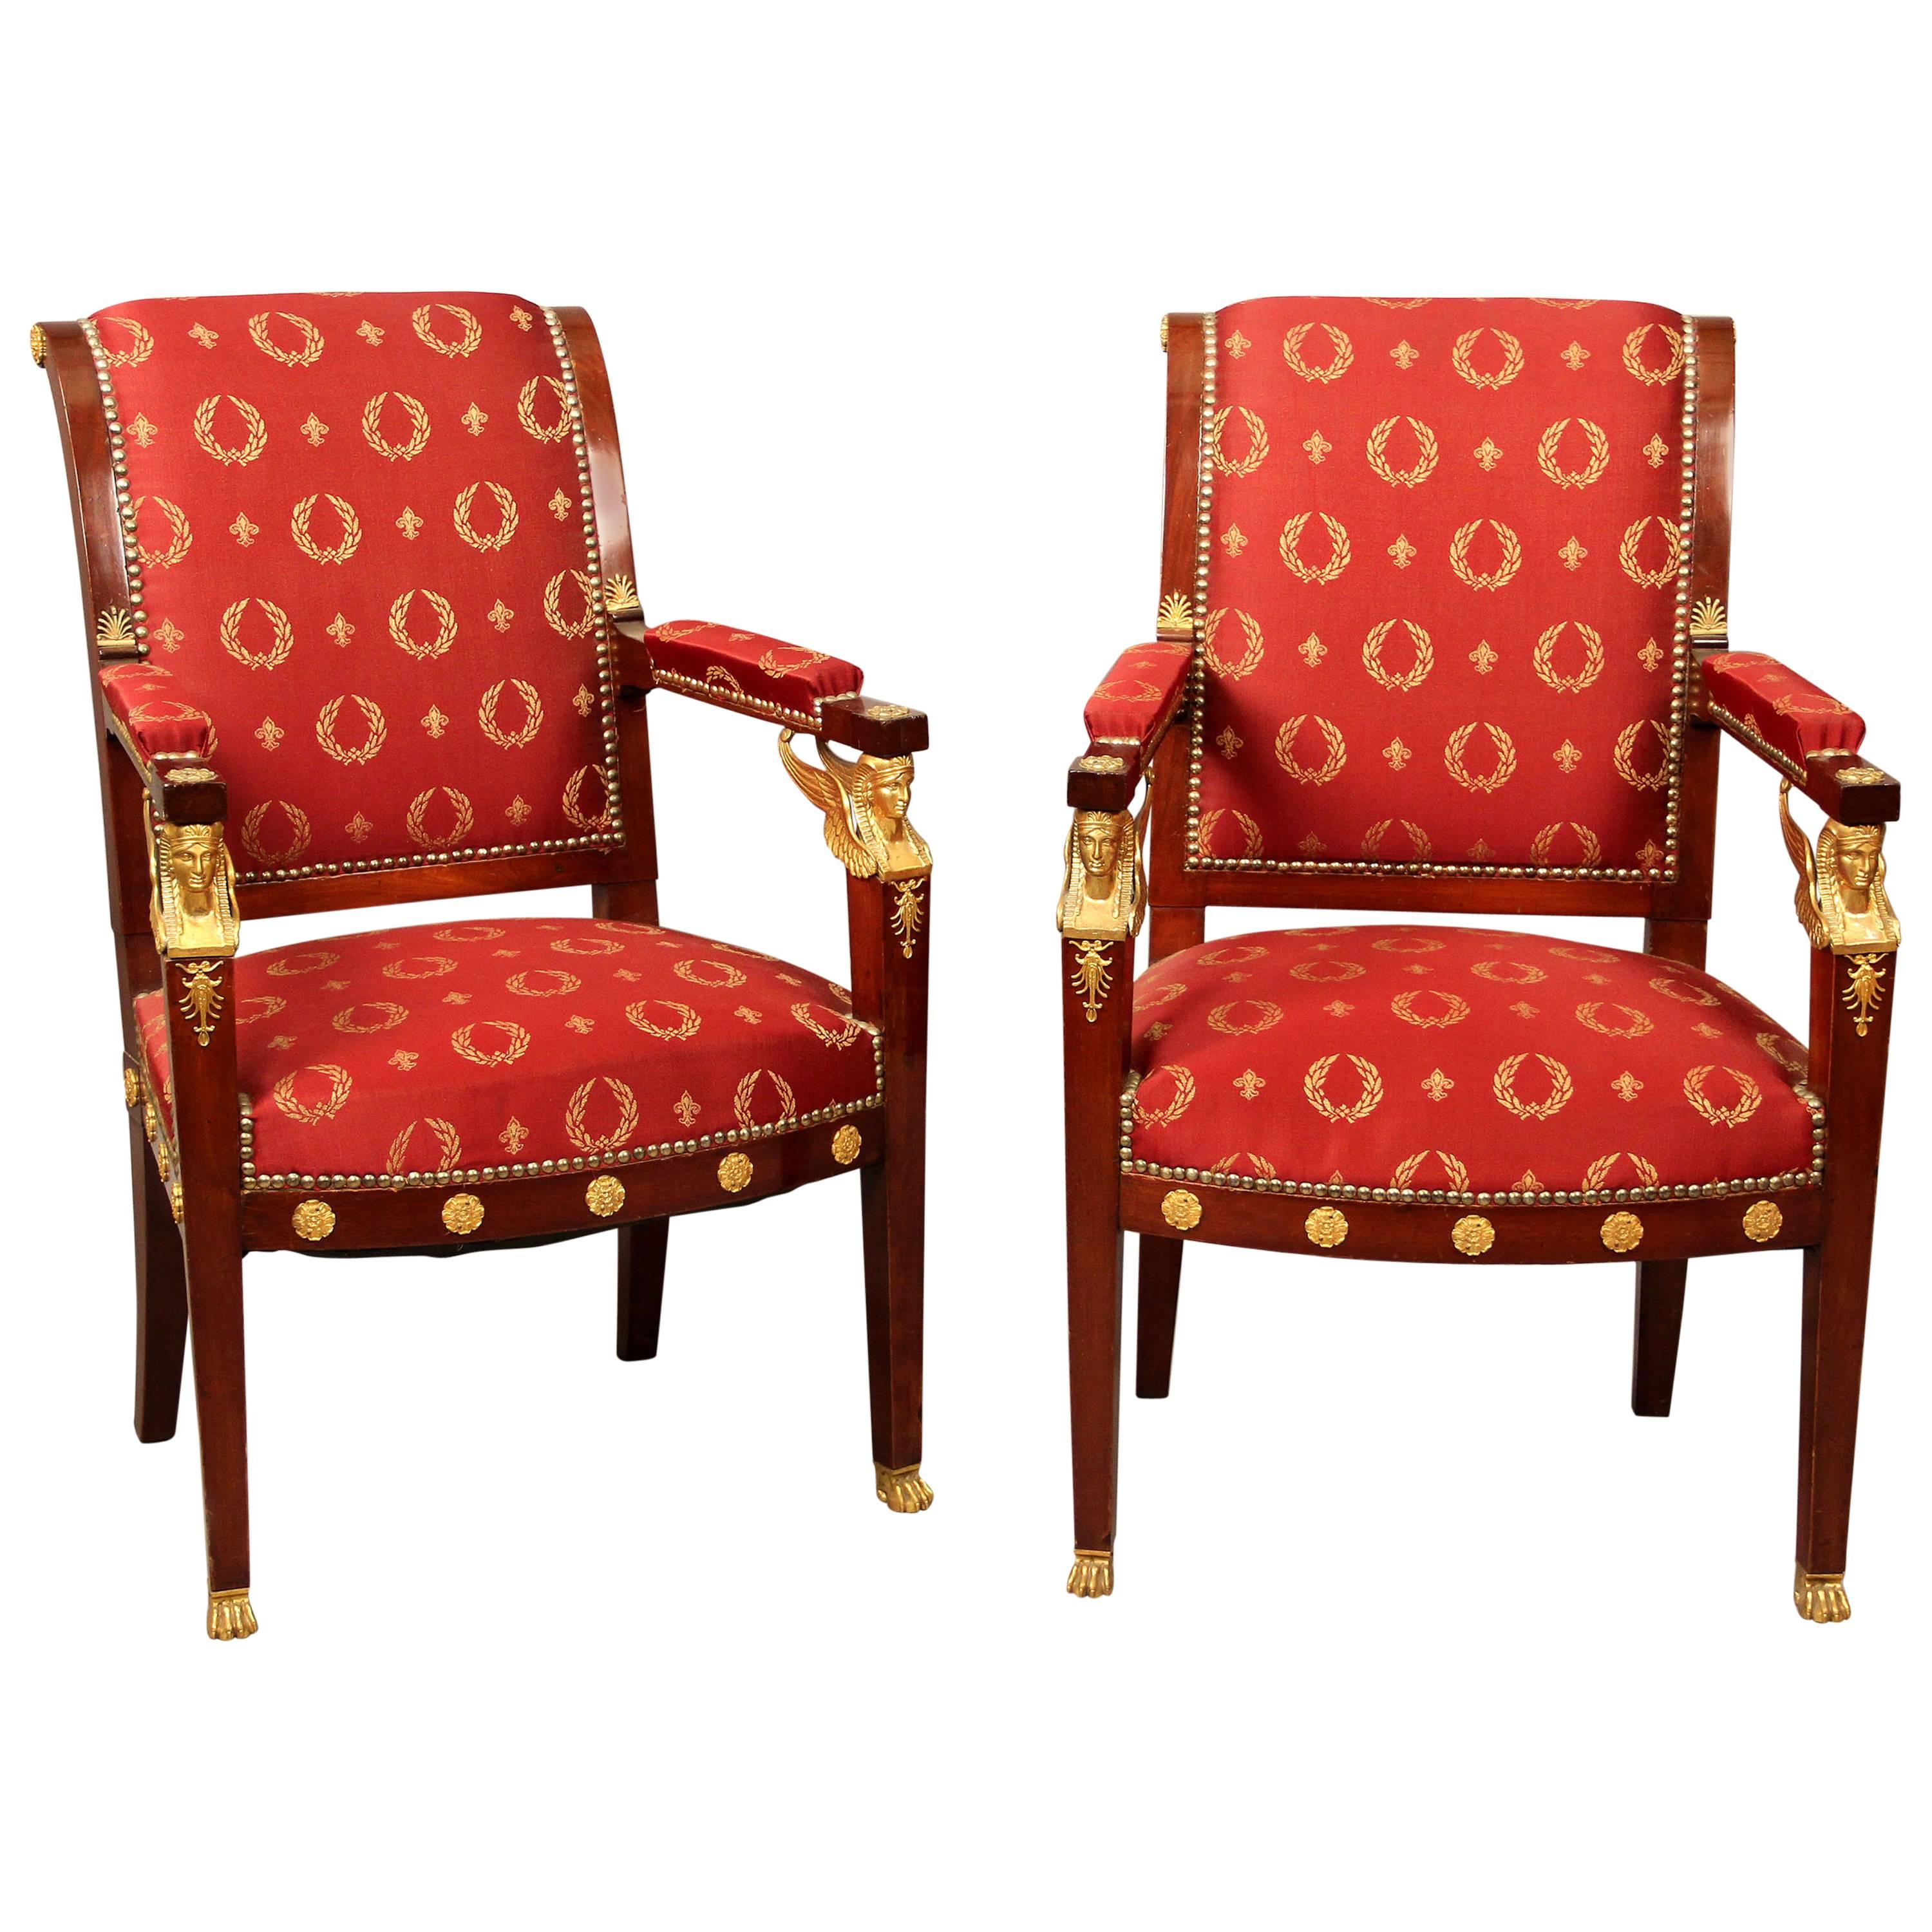 Fine Pair of Early 20th Century Gilt Bronze-Mounted Empire Style Armchairs